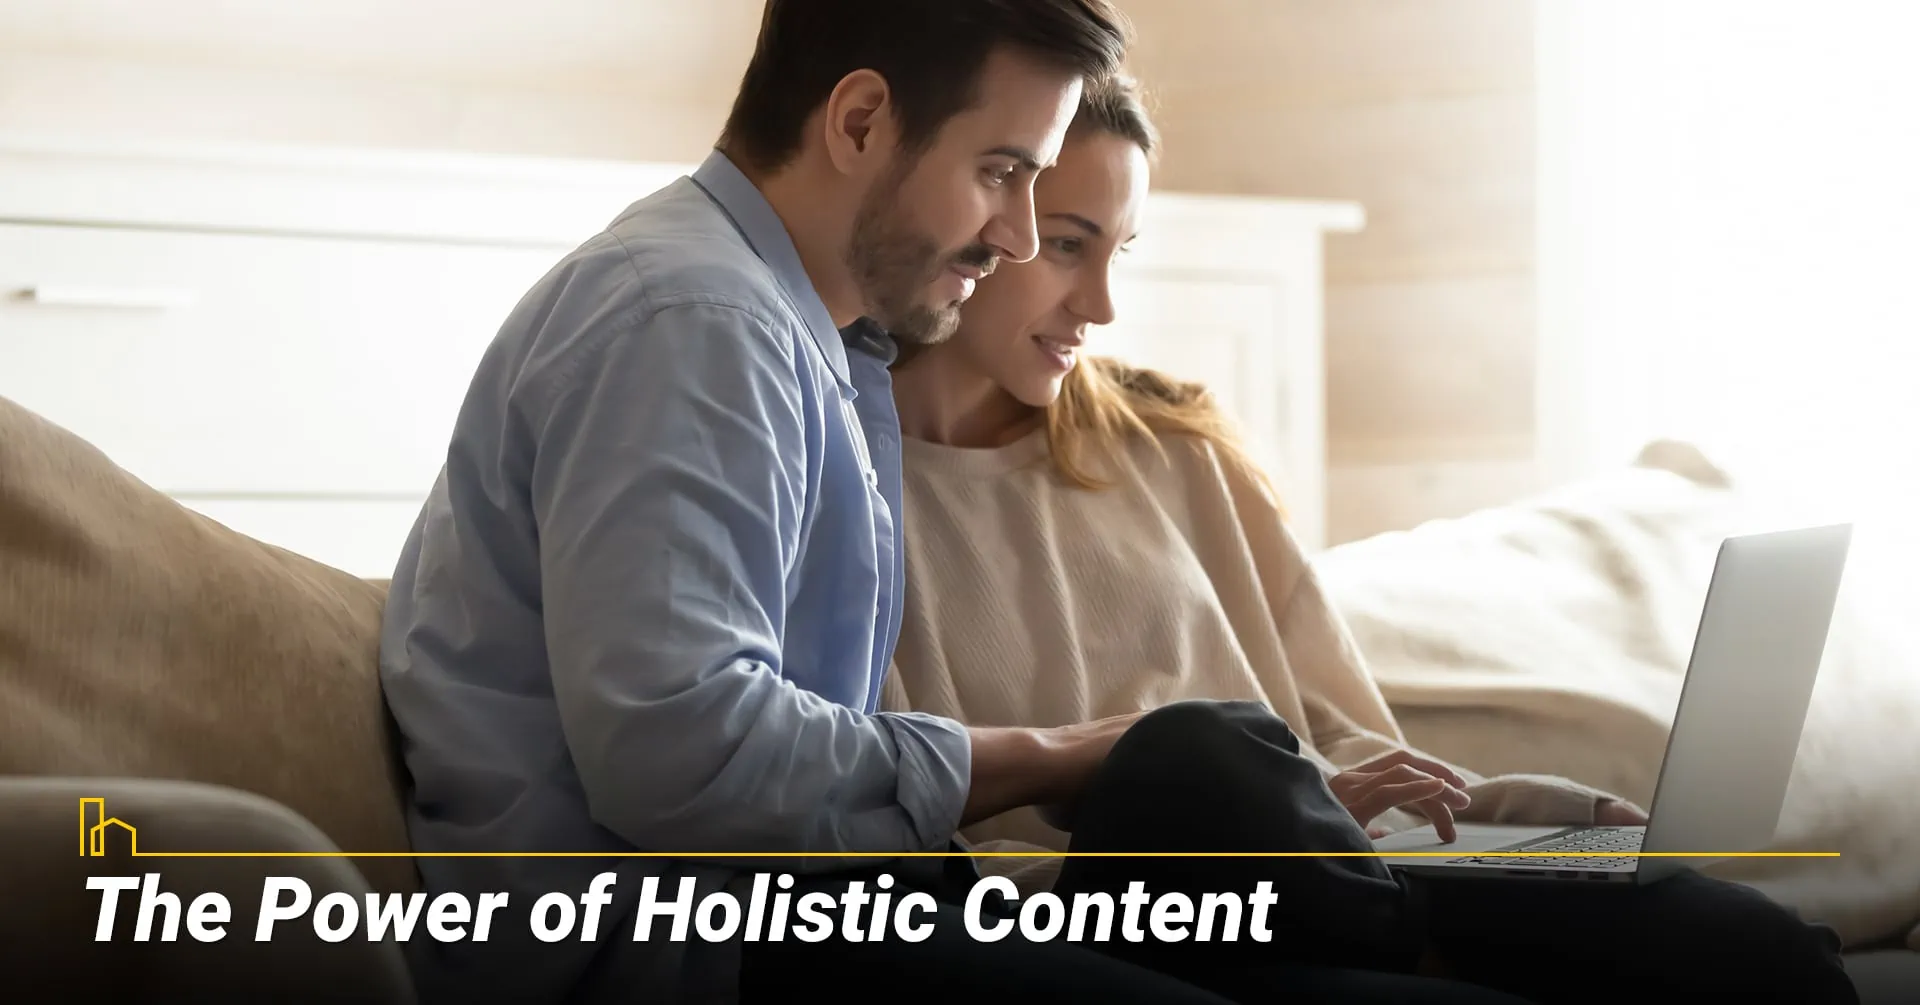 The Power of Holistic Content